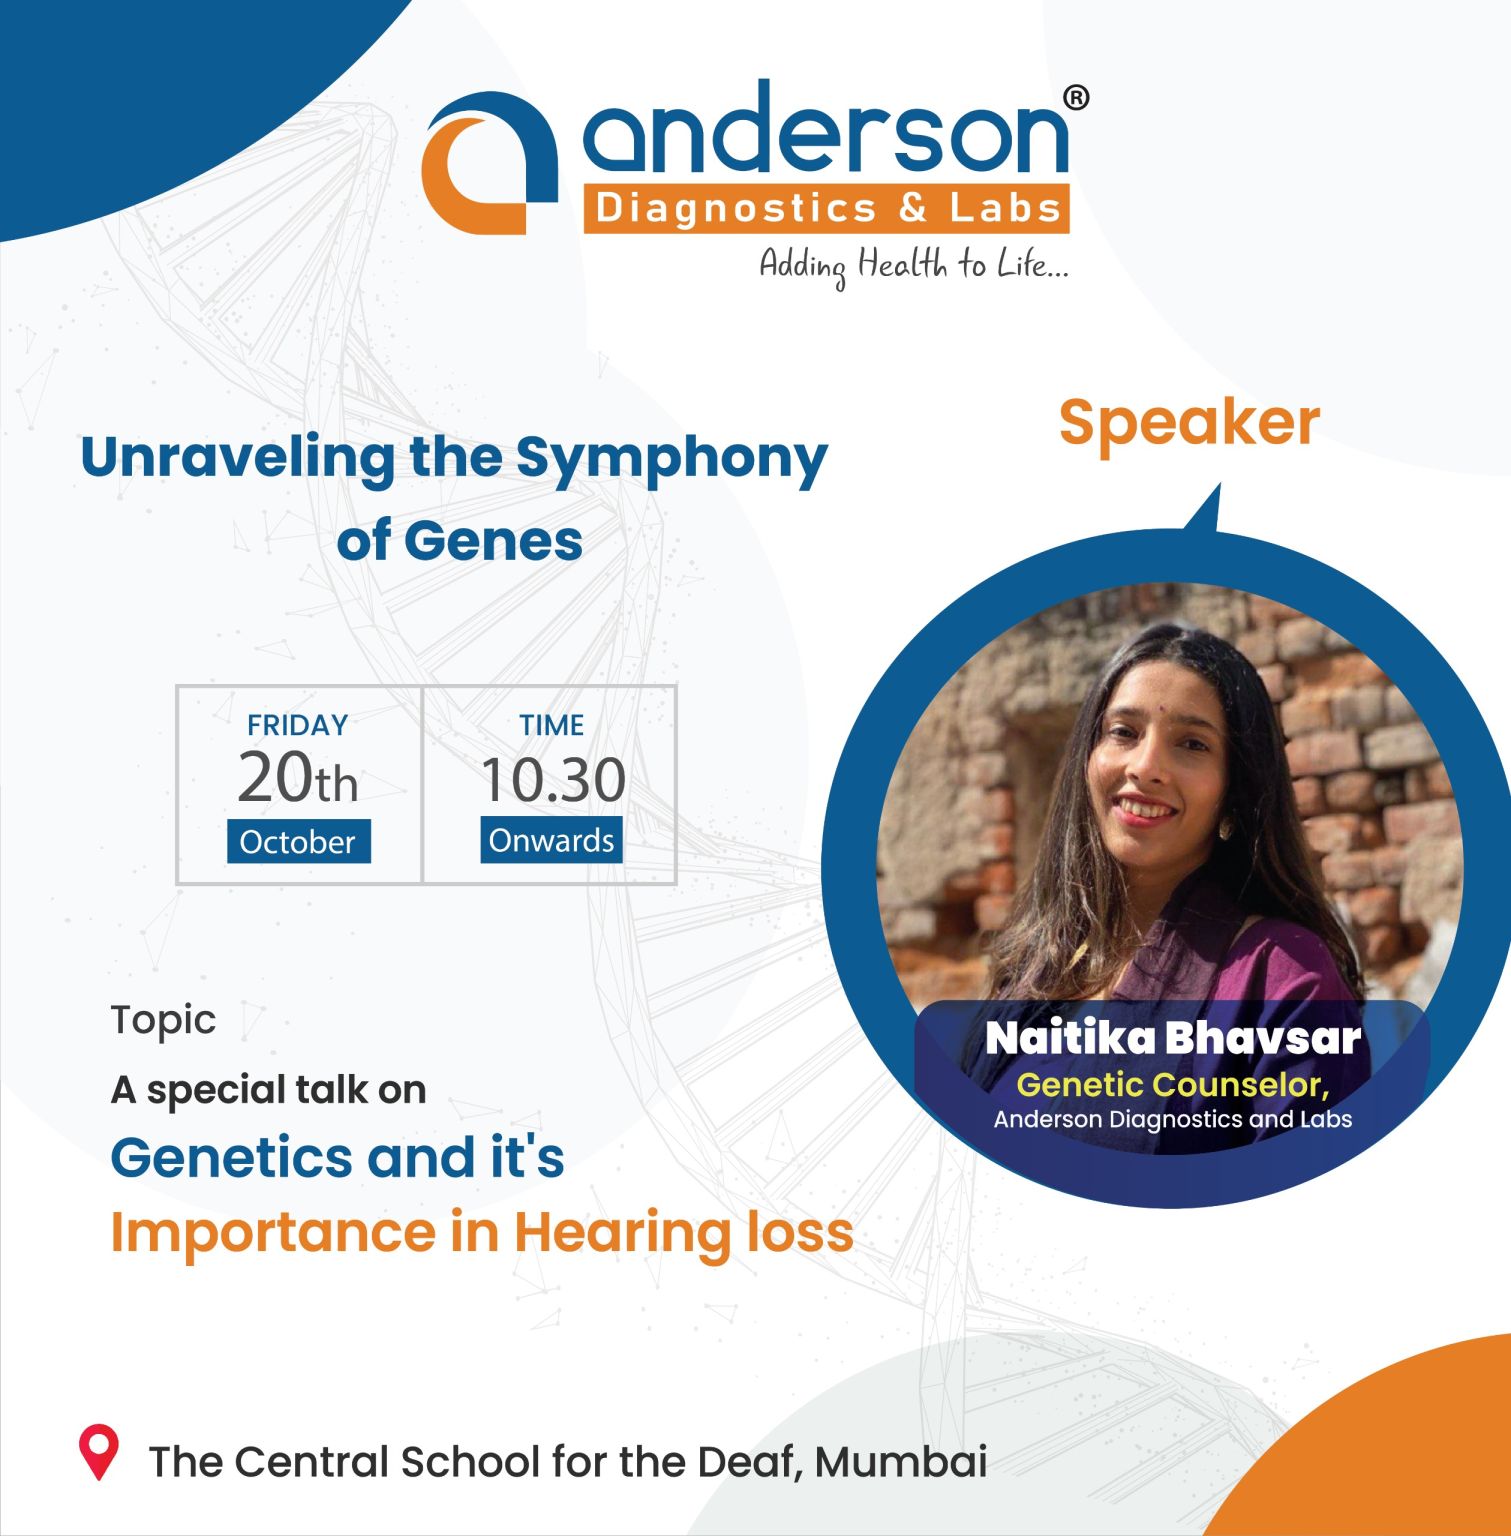 An invite banner image for a special talk on Genetics and Its Importance in Hearing loss at The Central School for the Deaf, Mumbai, as Naitika Bhavskar, Genetic Counselor from Anderson Diagnostics.